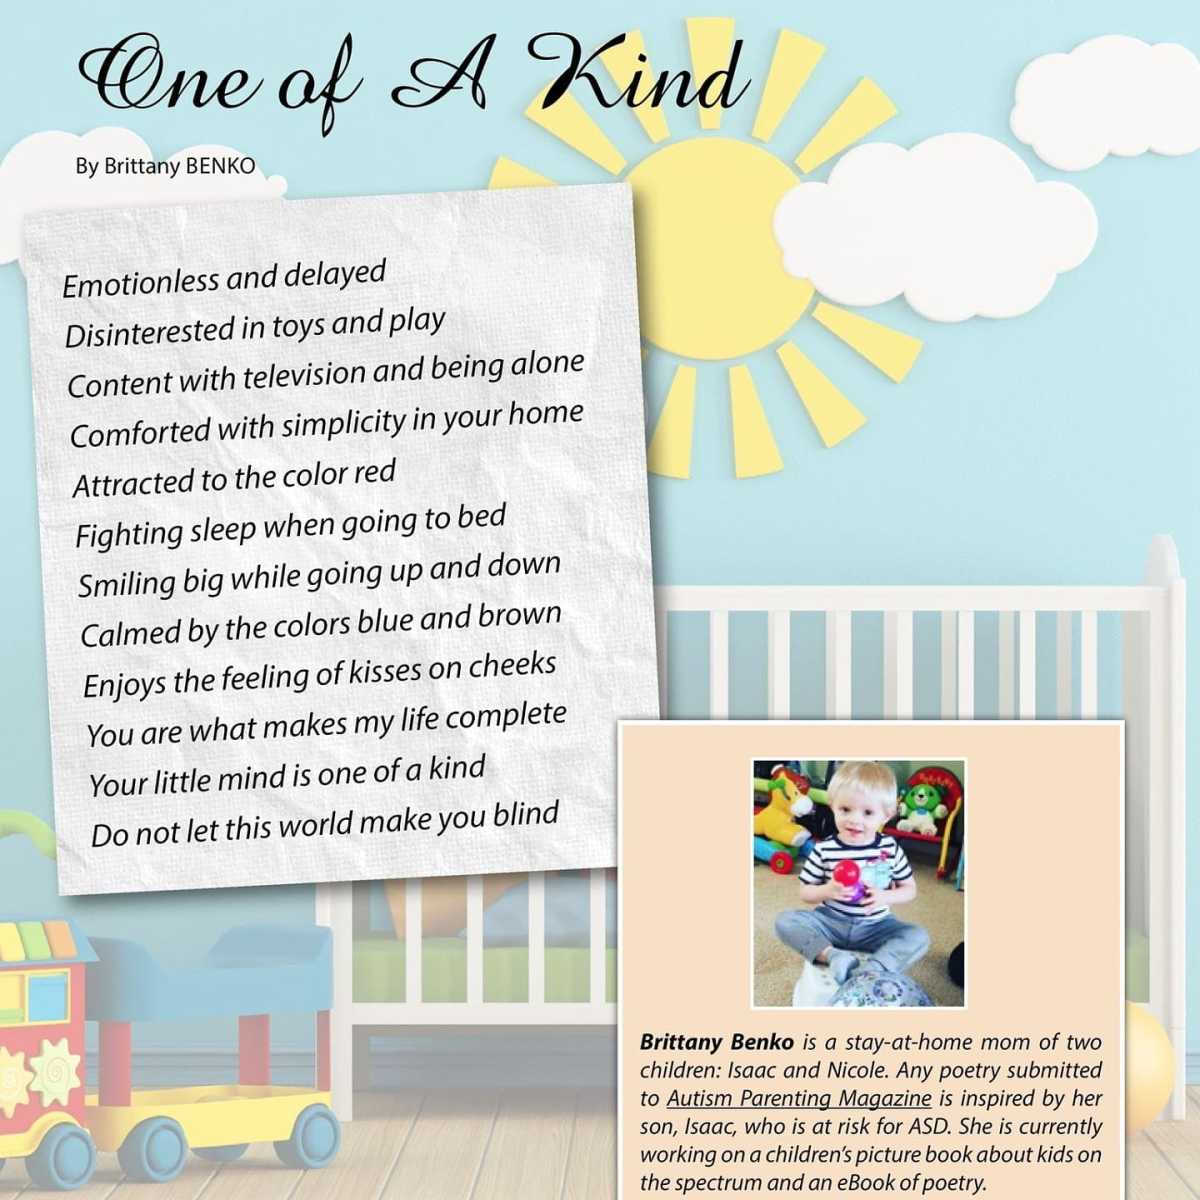 Featured in the Autism Parenting Magazine in the month of January of 2021